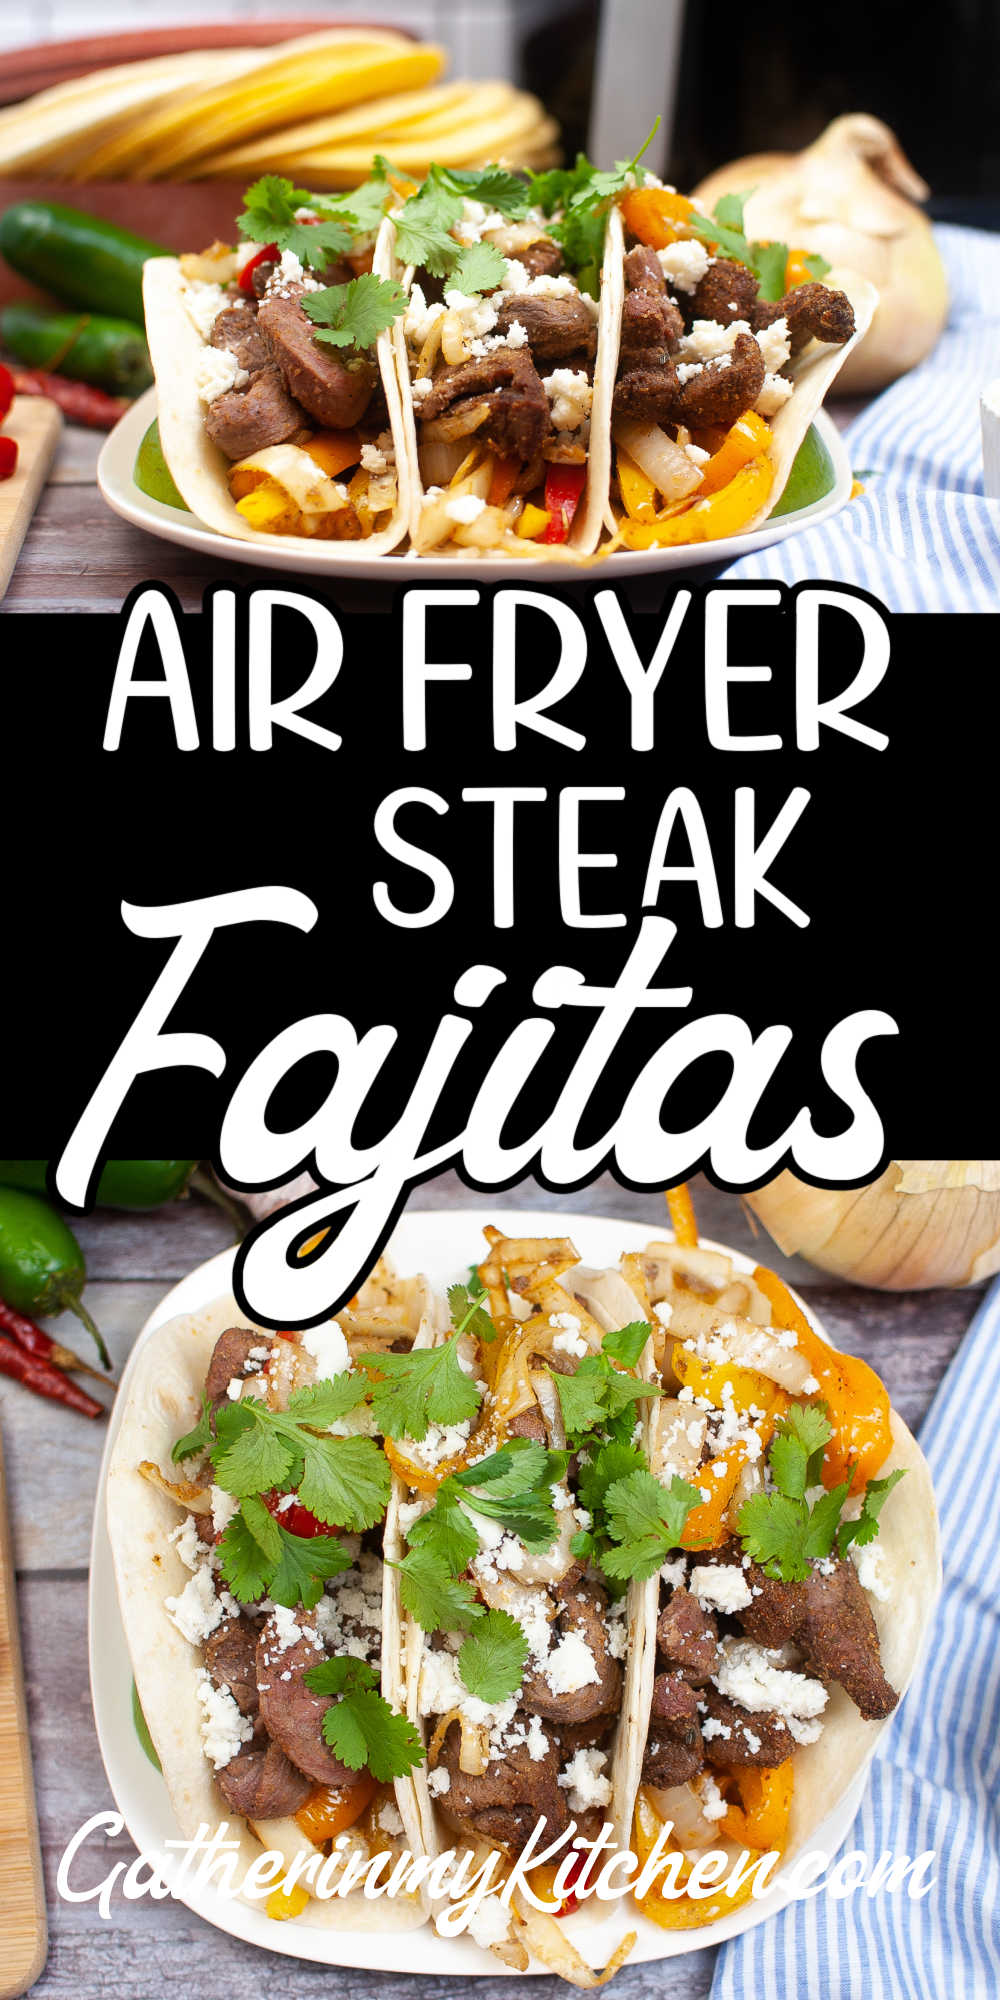 Pin image: top has 3 fajitas on a plate side view, middle says "Air Fryer steak fajitas" and bottom has top down view of three fajitas on a plate.